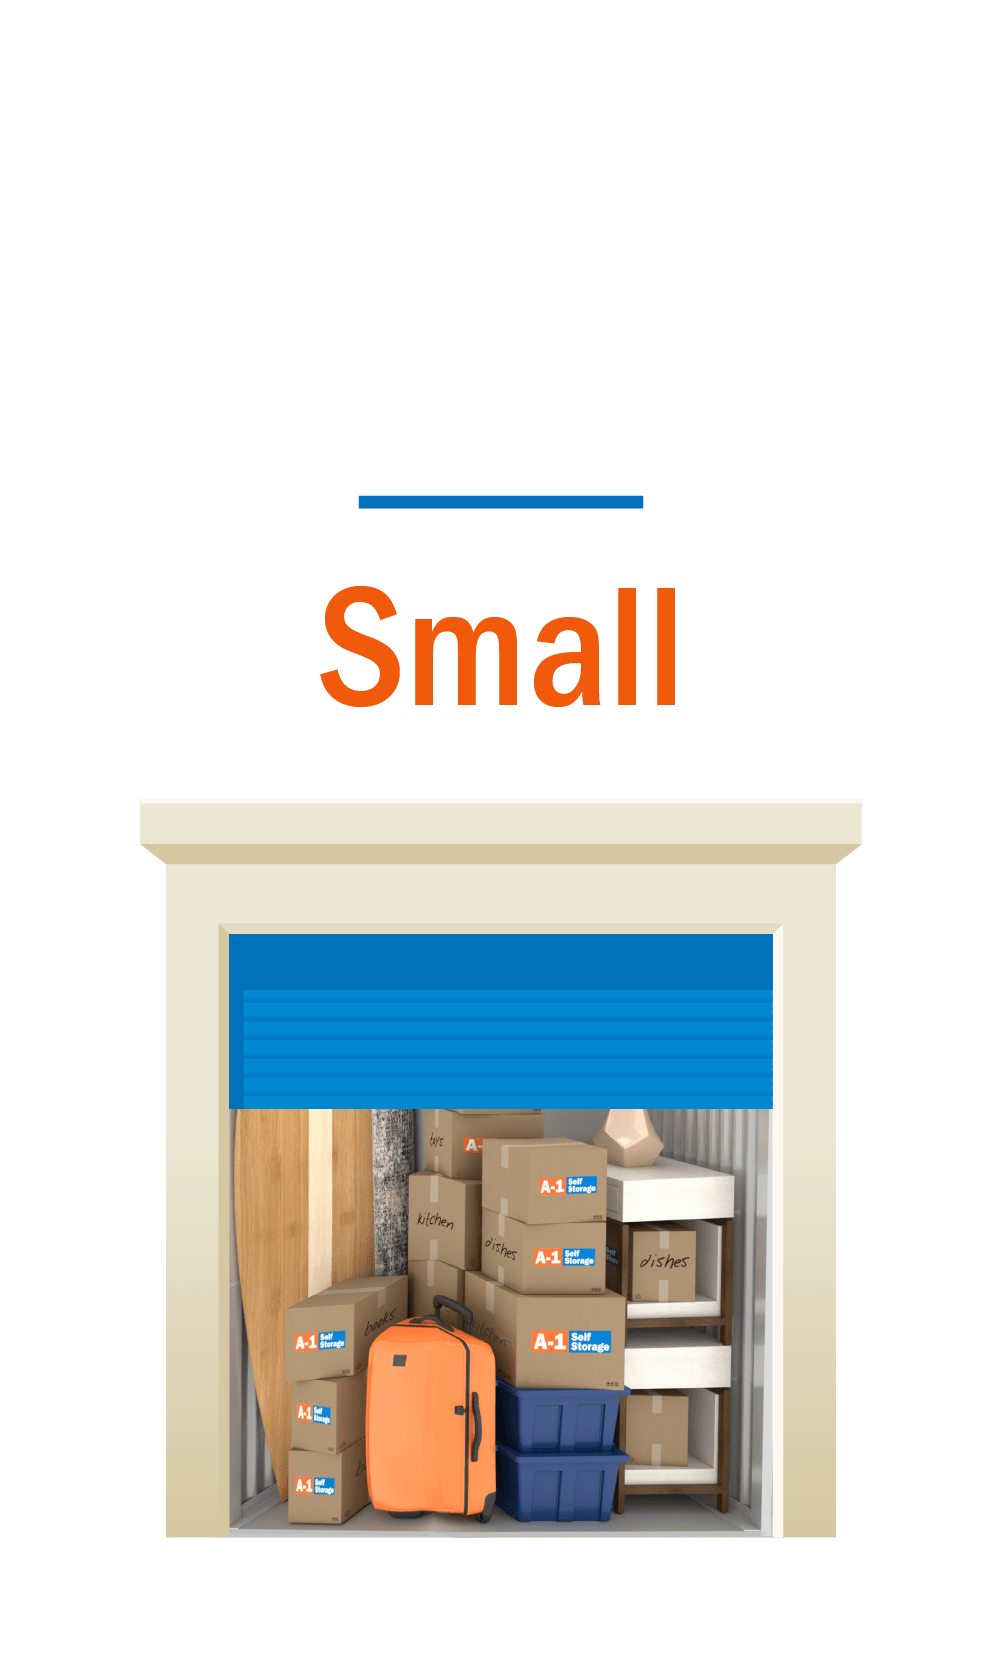 Small storage unit graphic with open door